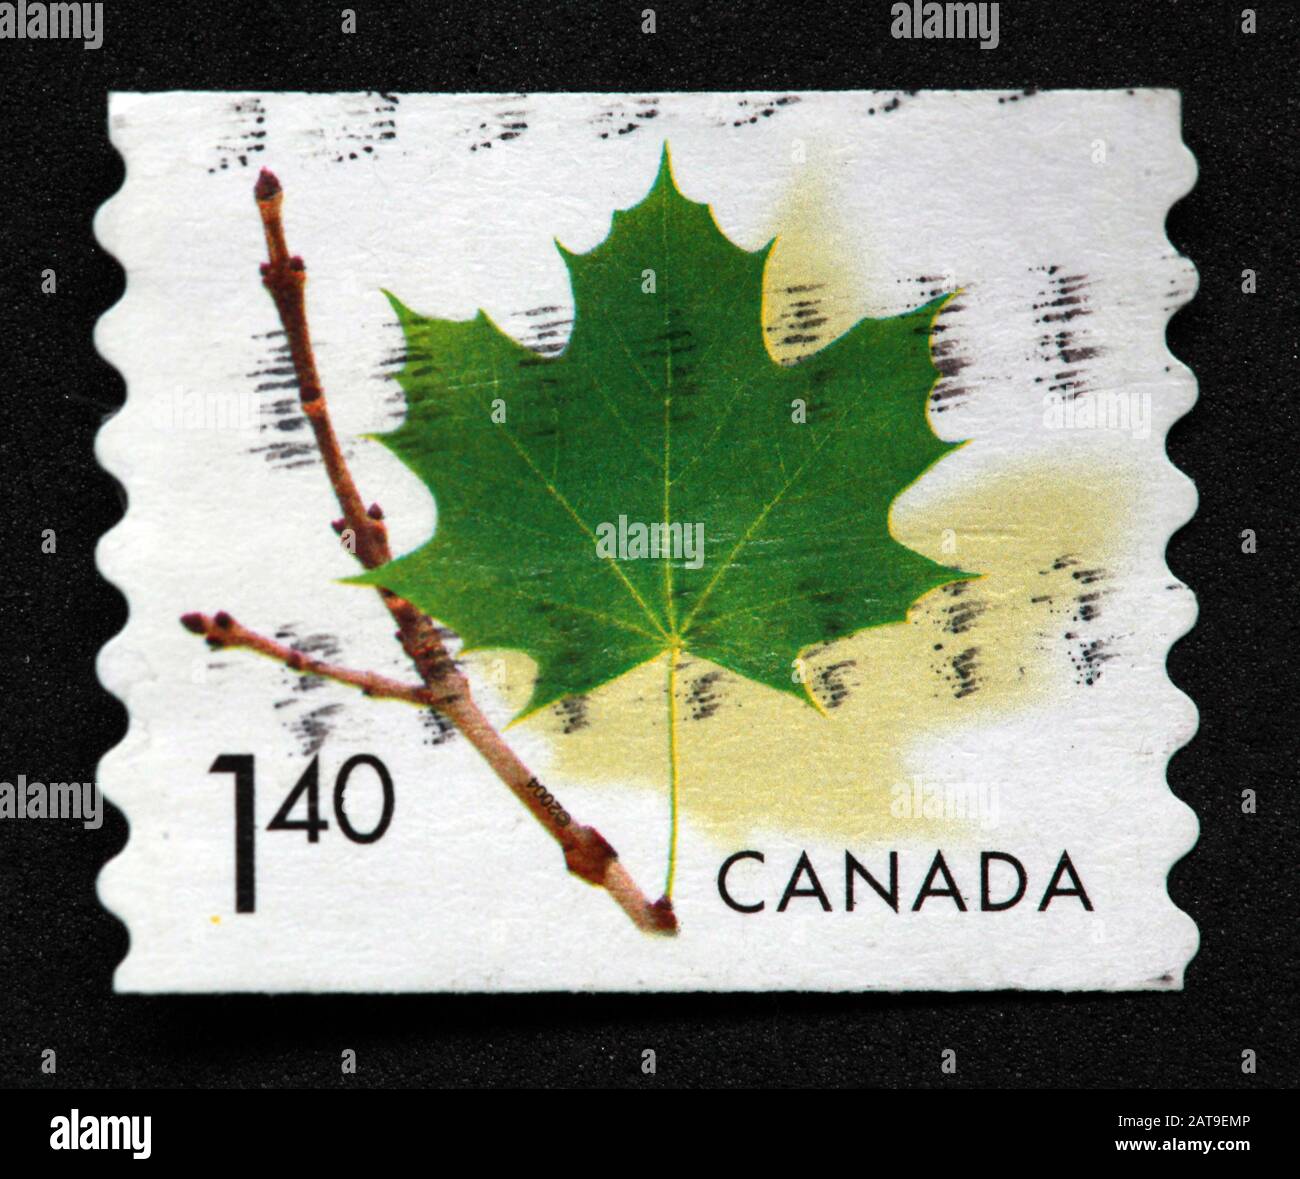 Canadian Stamp, Canada Stamp, Canada Post, usato Stamp, Canada 1,40, foglia di acero, albero di acero Foto Stock